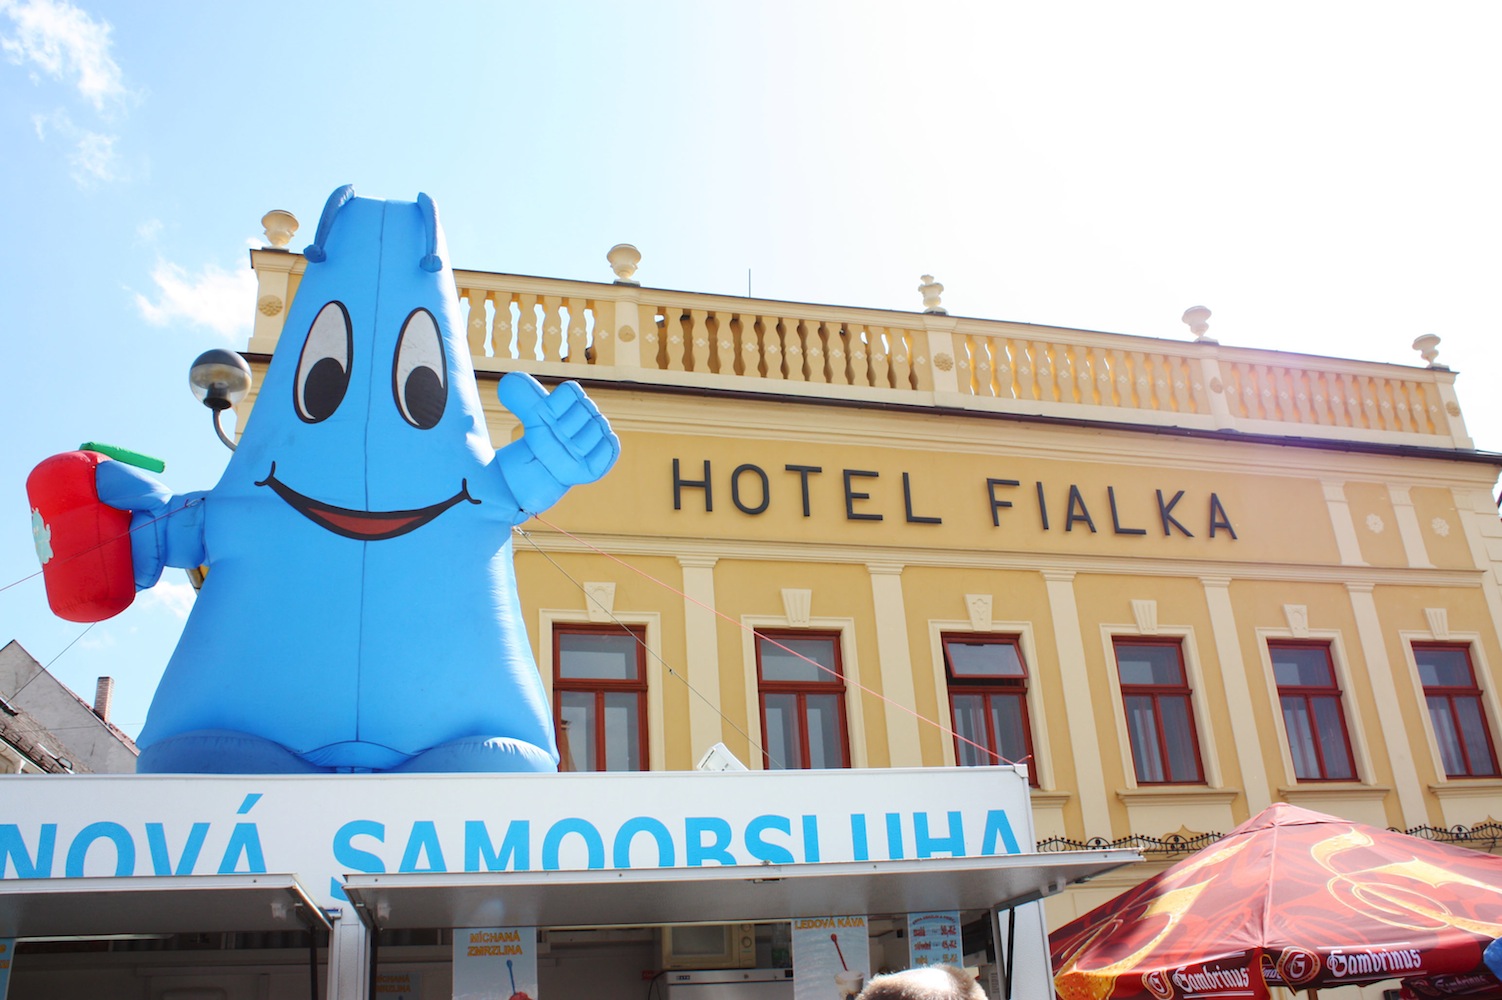 Picture of the Hotel Fialka